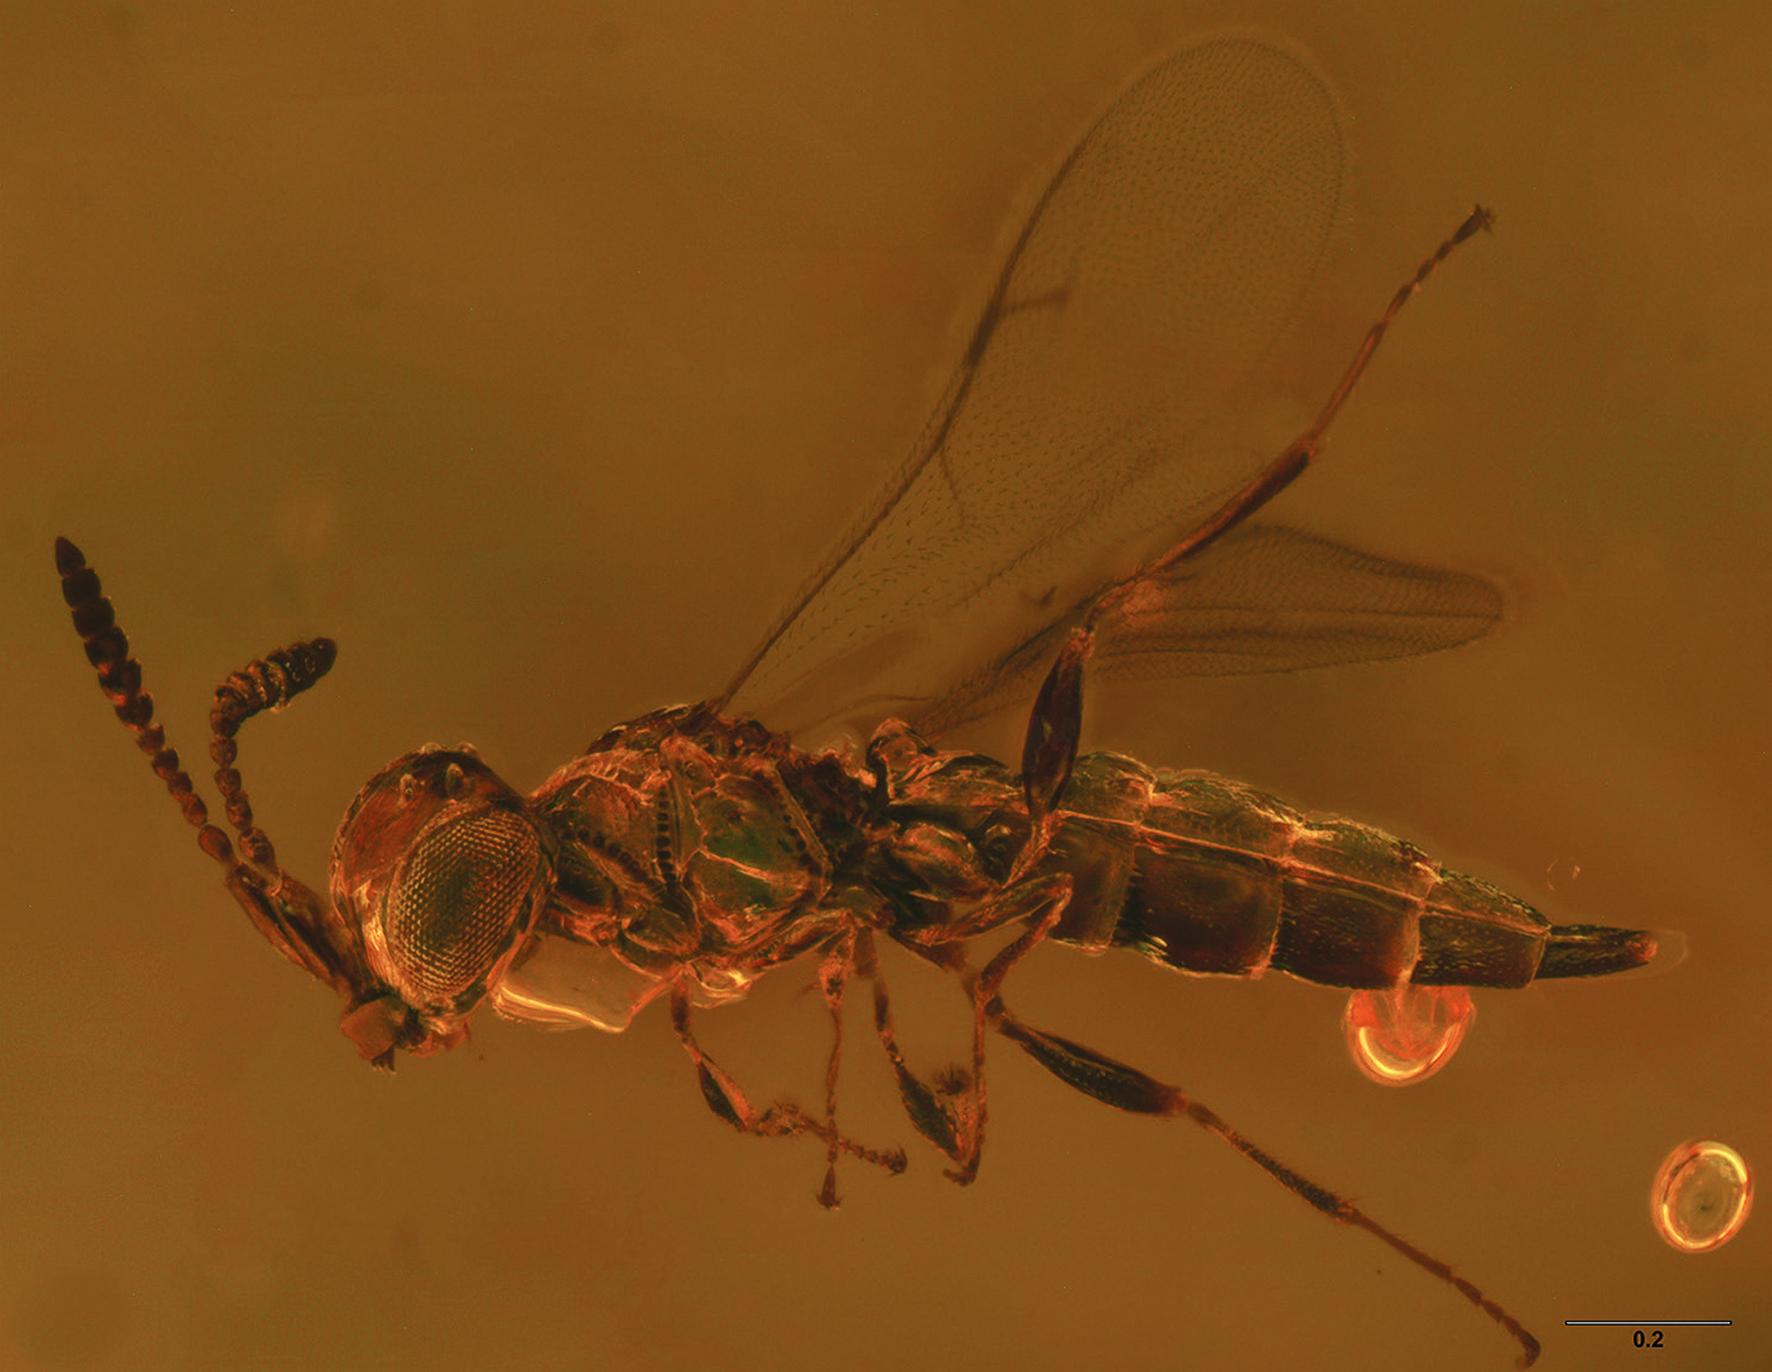 ﻿Archaeoteleia Masner in the Cretaceous and a new species of Proteroscelio Brues (Hymenoptera, Platygastroidea)